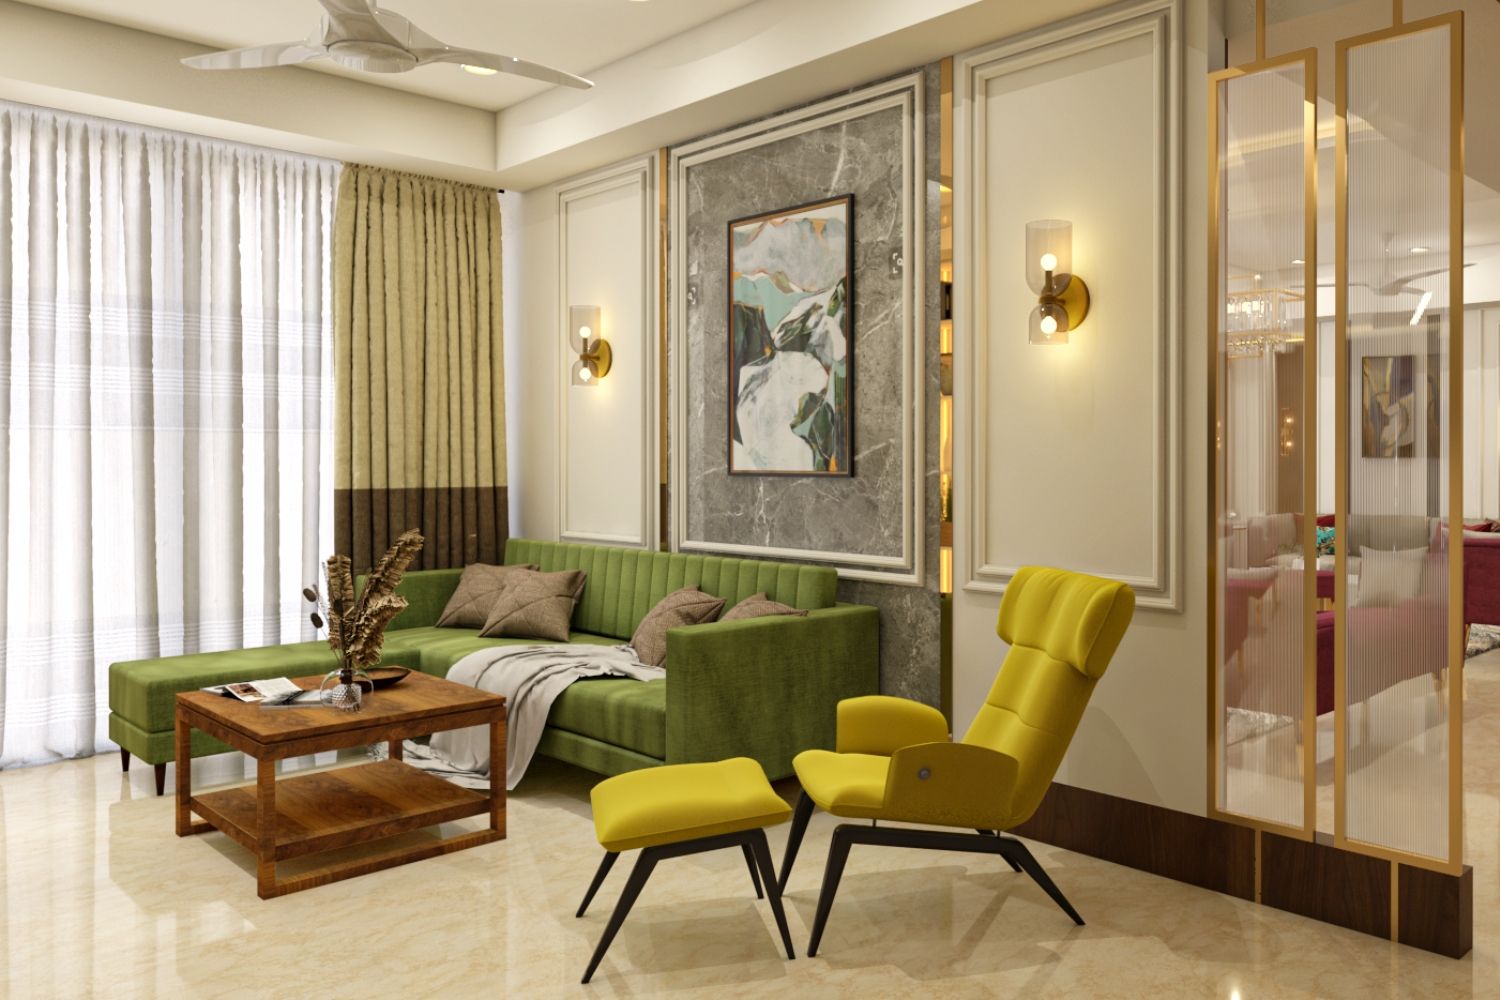 Contemporary Living Room Design With Green Sectional Sofa And Yellow Accent Chair